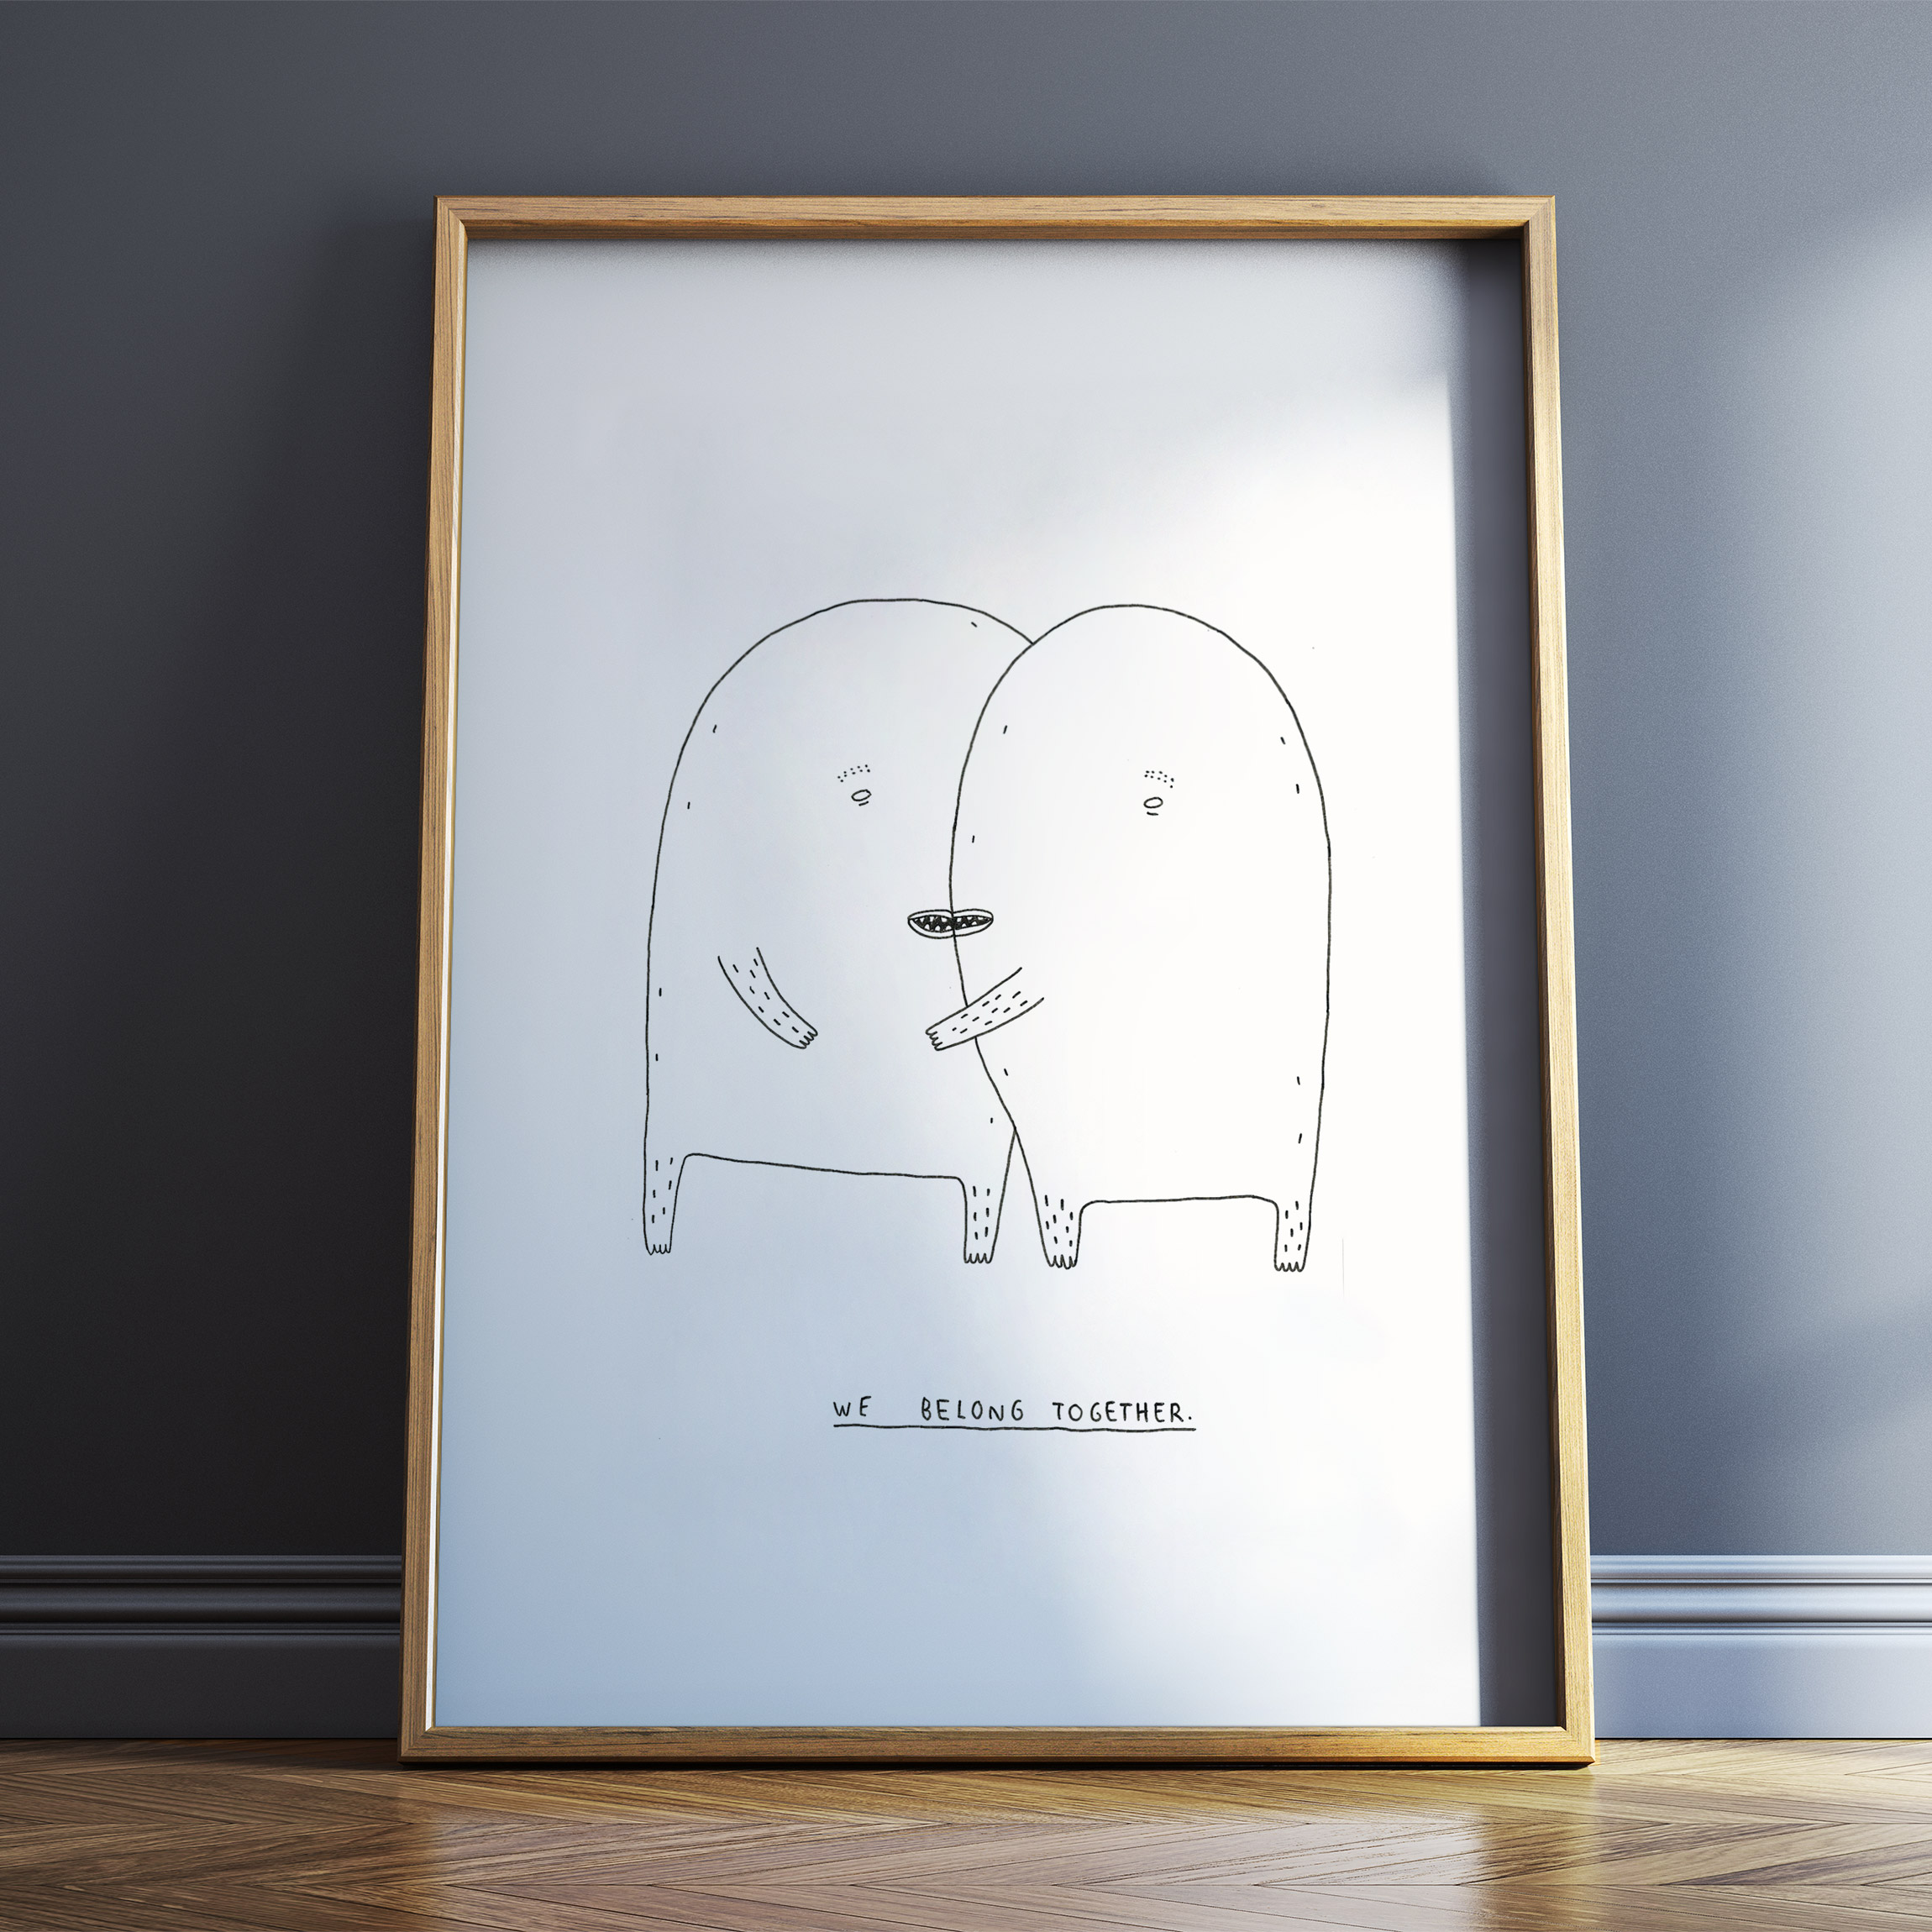 posters-prints, giclee-print, family-friendly, illustrative, minimalistic, children, moods, people, black, white, paper, black-and-white, cute, danish, design, interior, interior-design, love, modern, modern-art, nordic, posters, prints, scandinavien, Buy original high quality art. Paintings, drawings, limited edition prints & posters by talented artists.